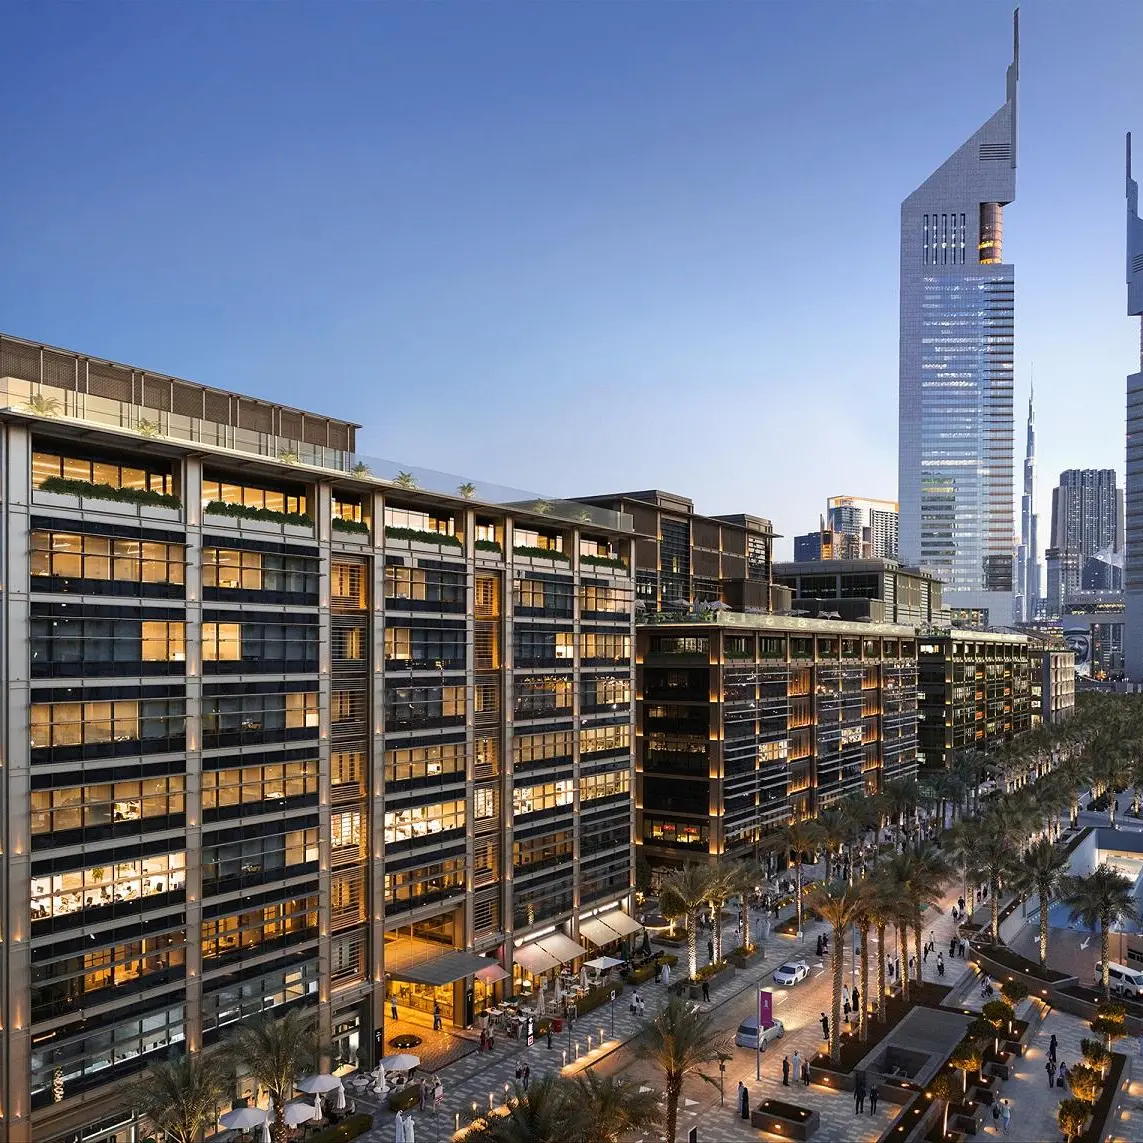 Cityscape plans exclusive event for global property heavyweights